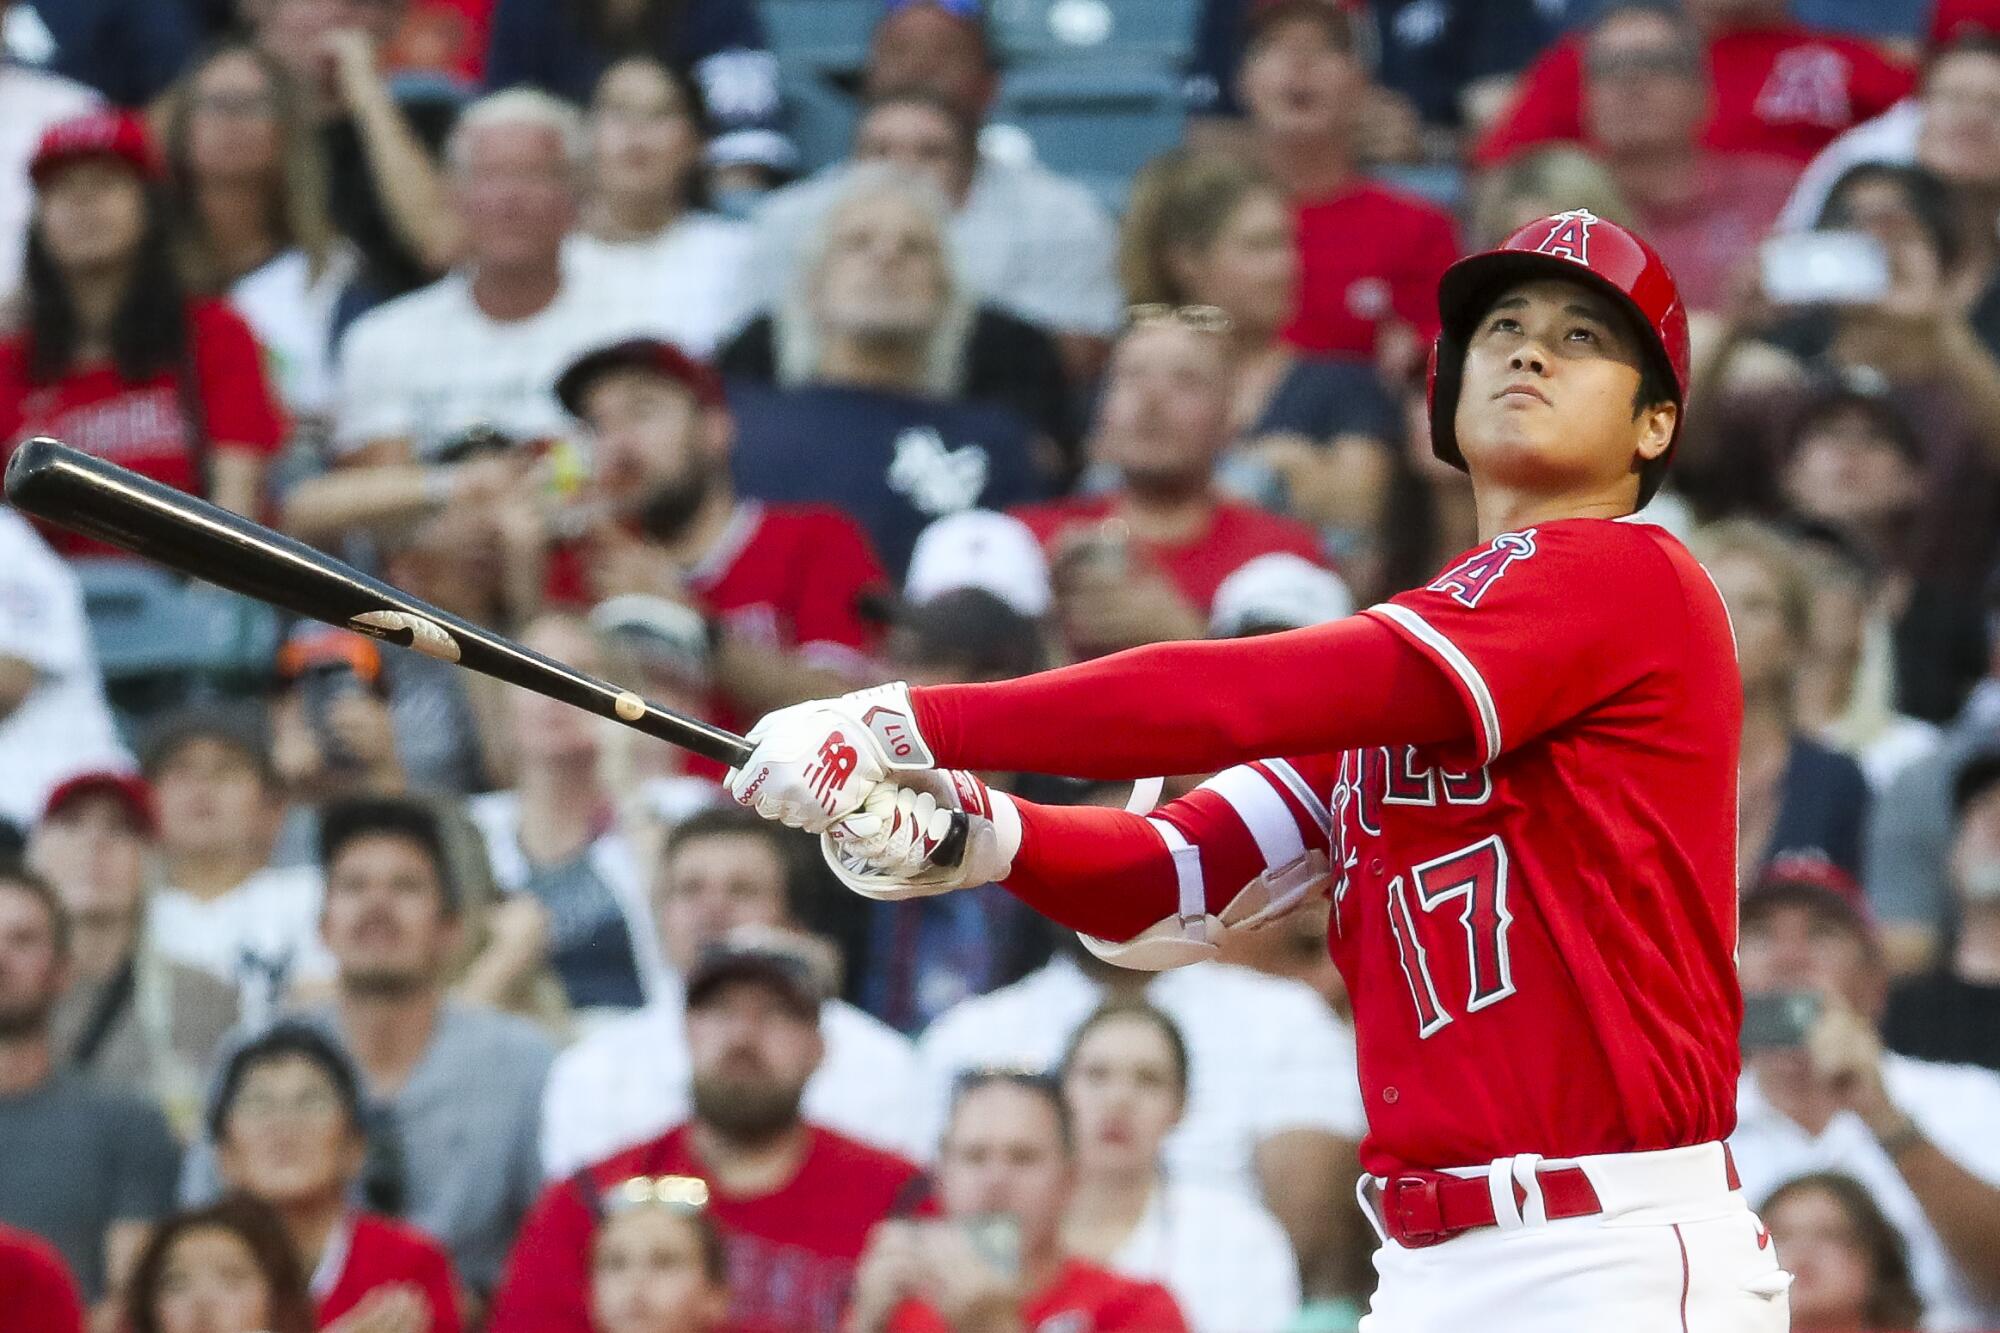 Shohei Ohtani swings the bat during a game against the Yankees at Angel Stadium.